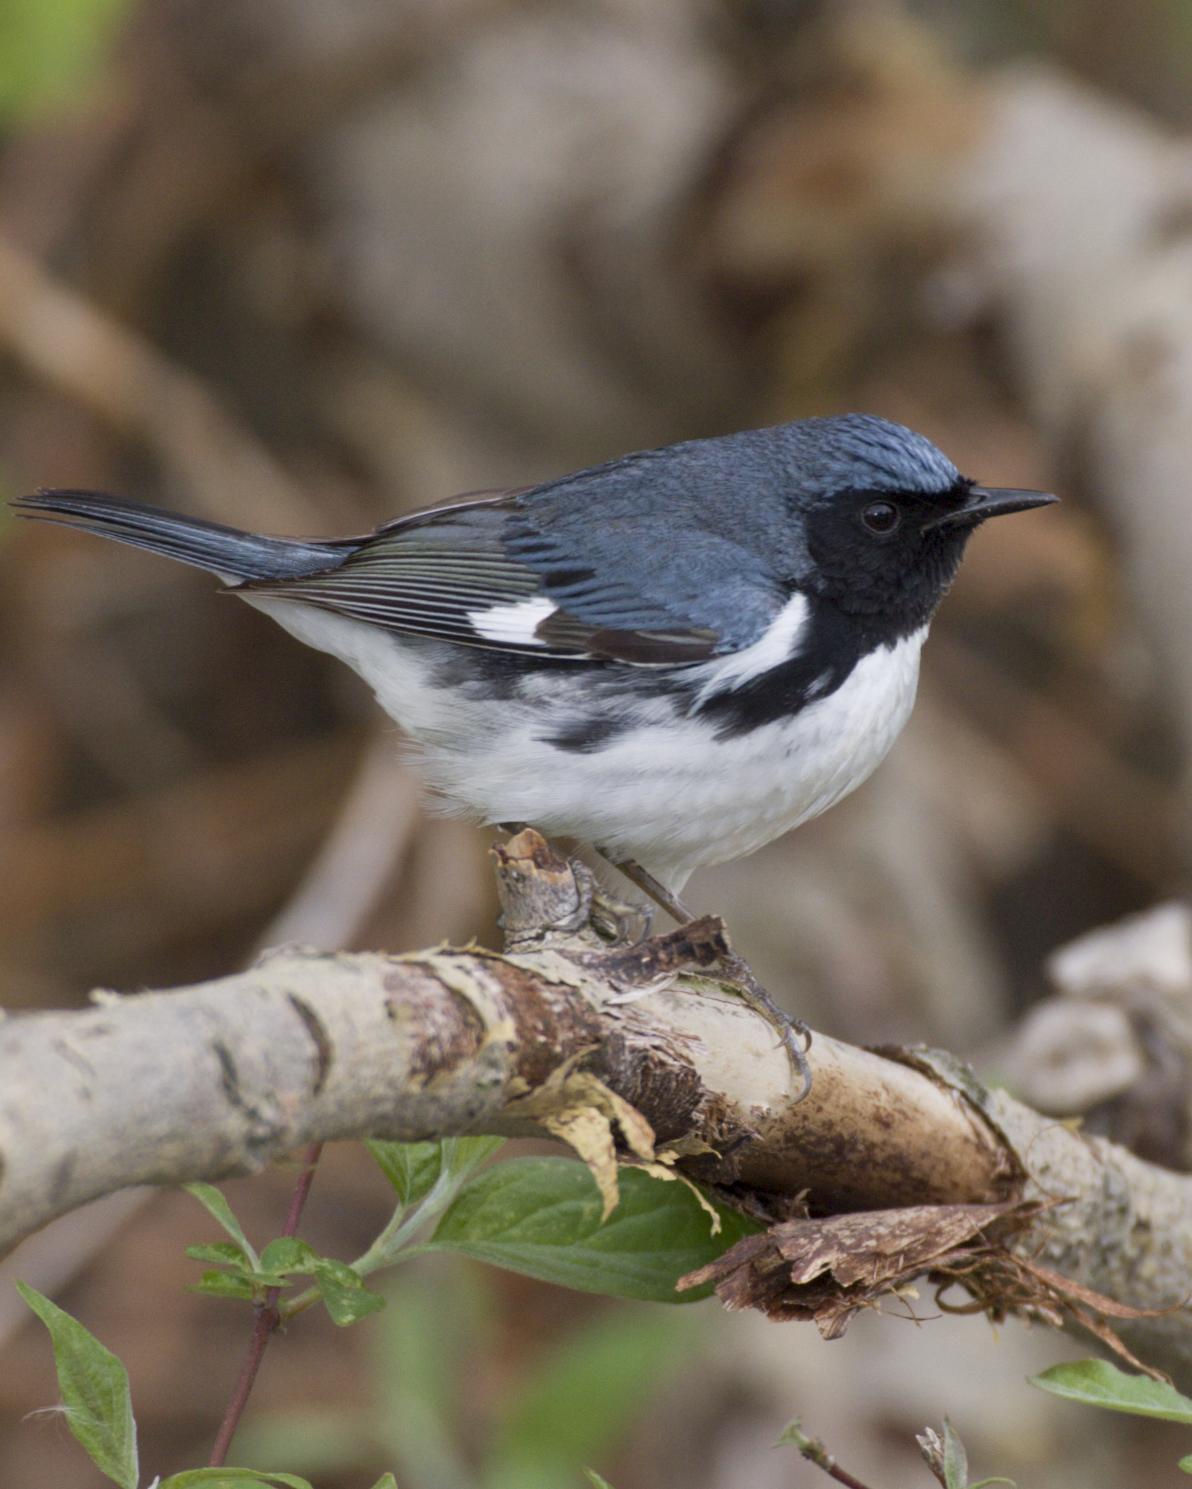 Black-throated Blue Warbler Photo by Jeff Moore